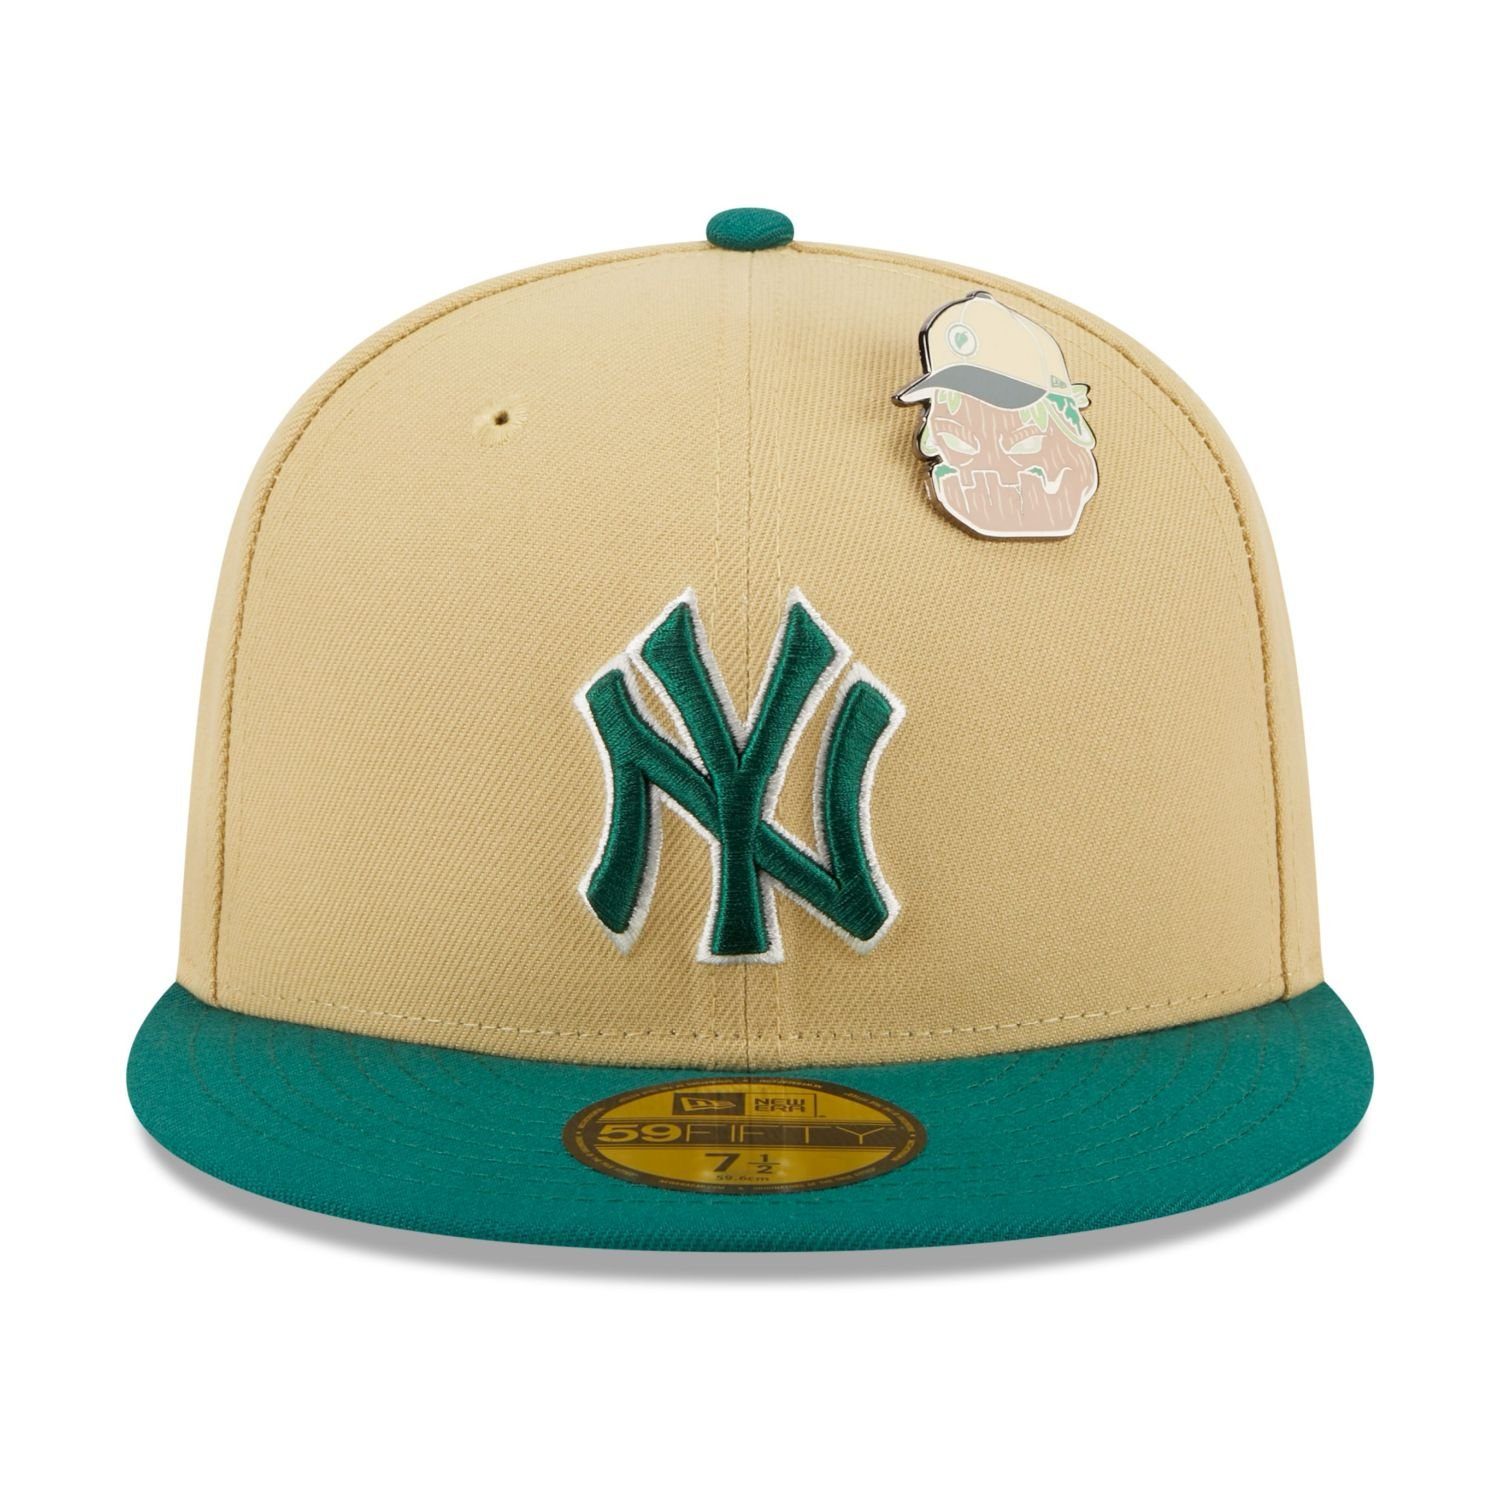 ELEMENTS PIN New 59Fifty York Fitted Cap New Yankees Era